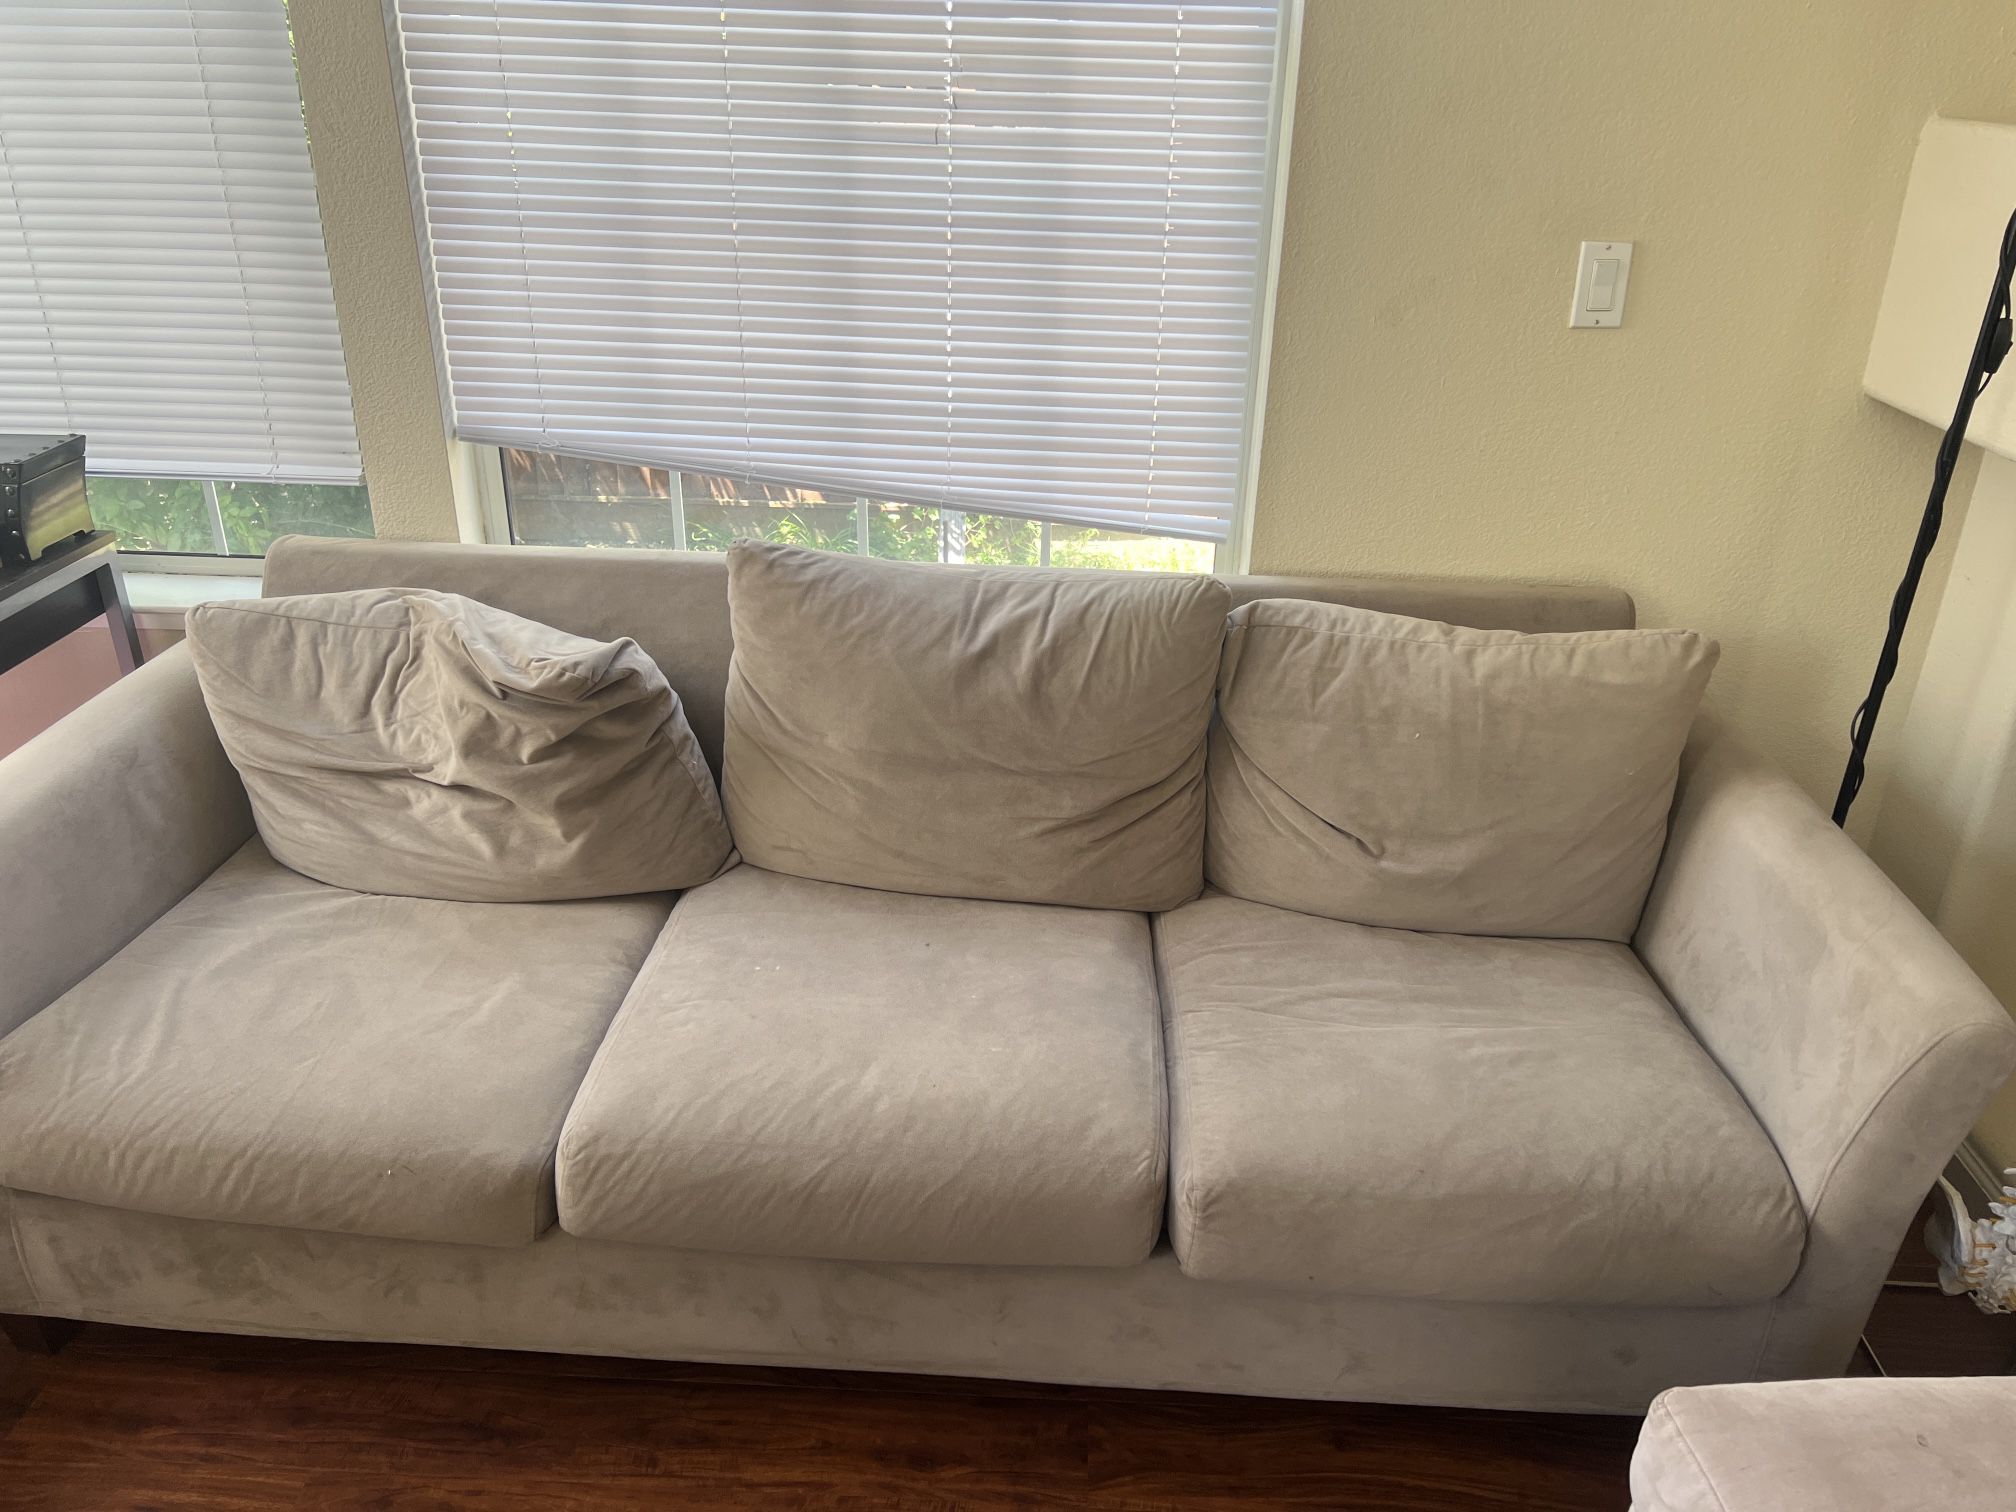 (2) Free Couches